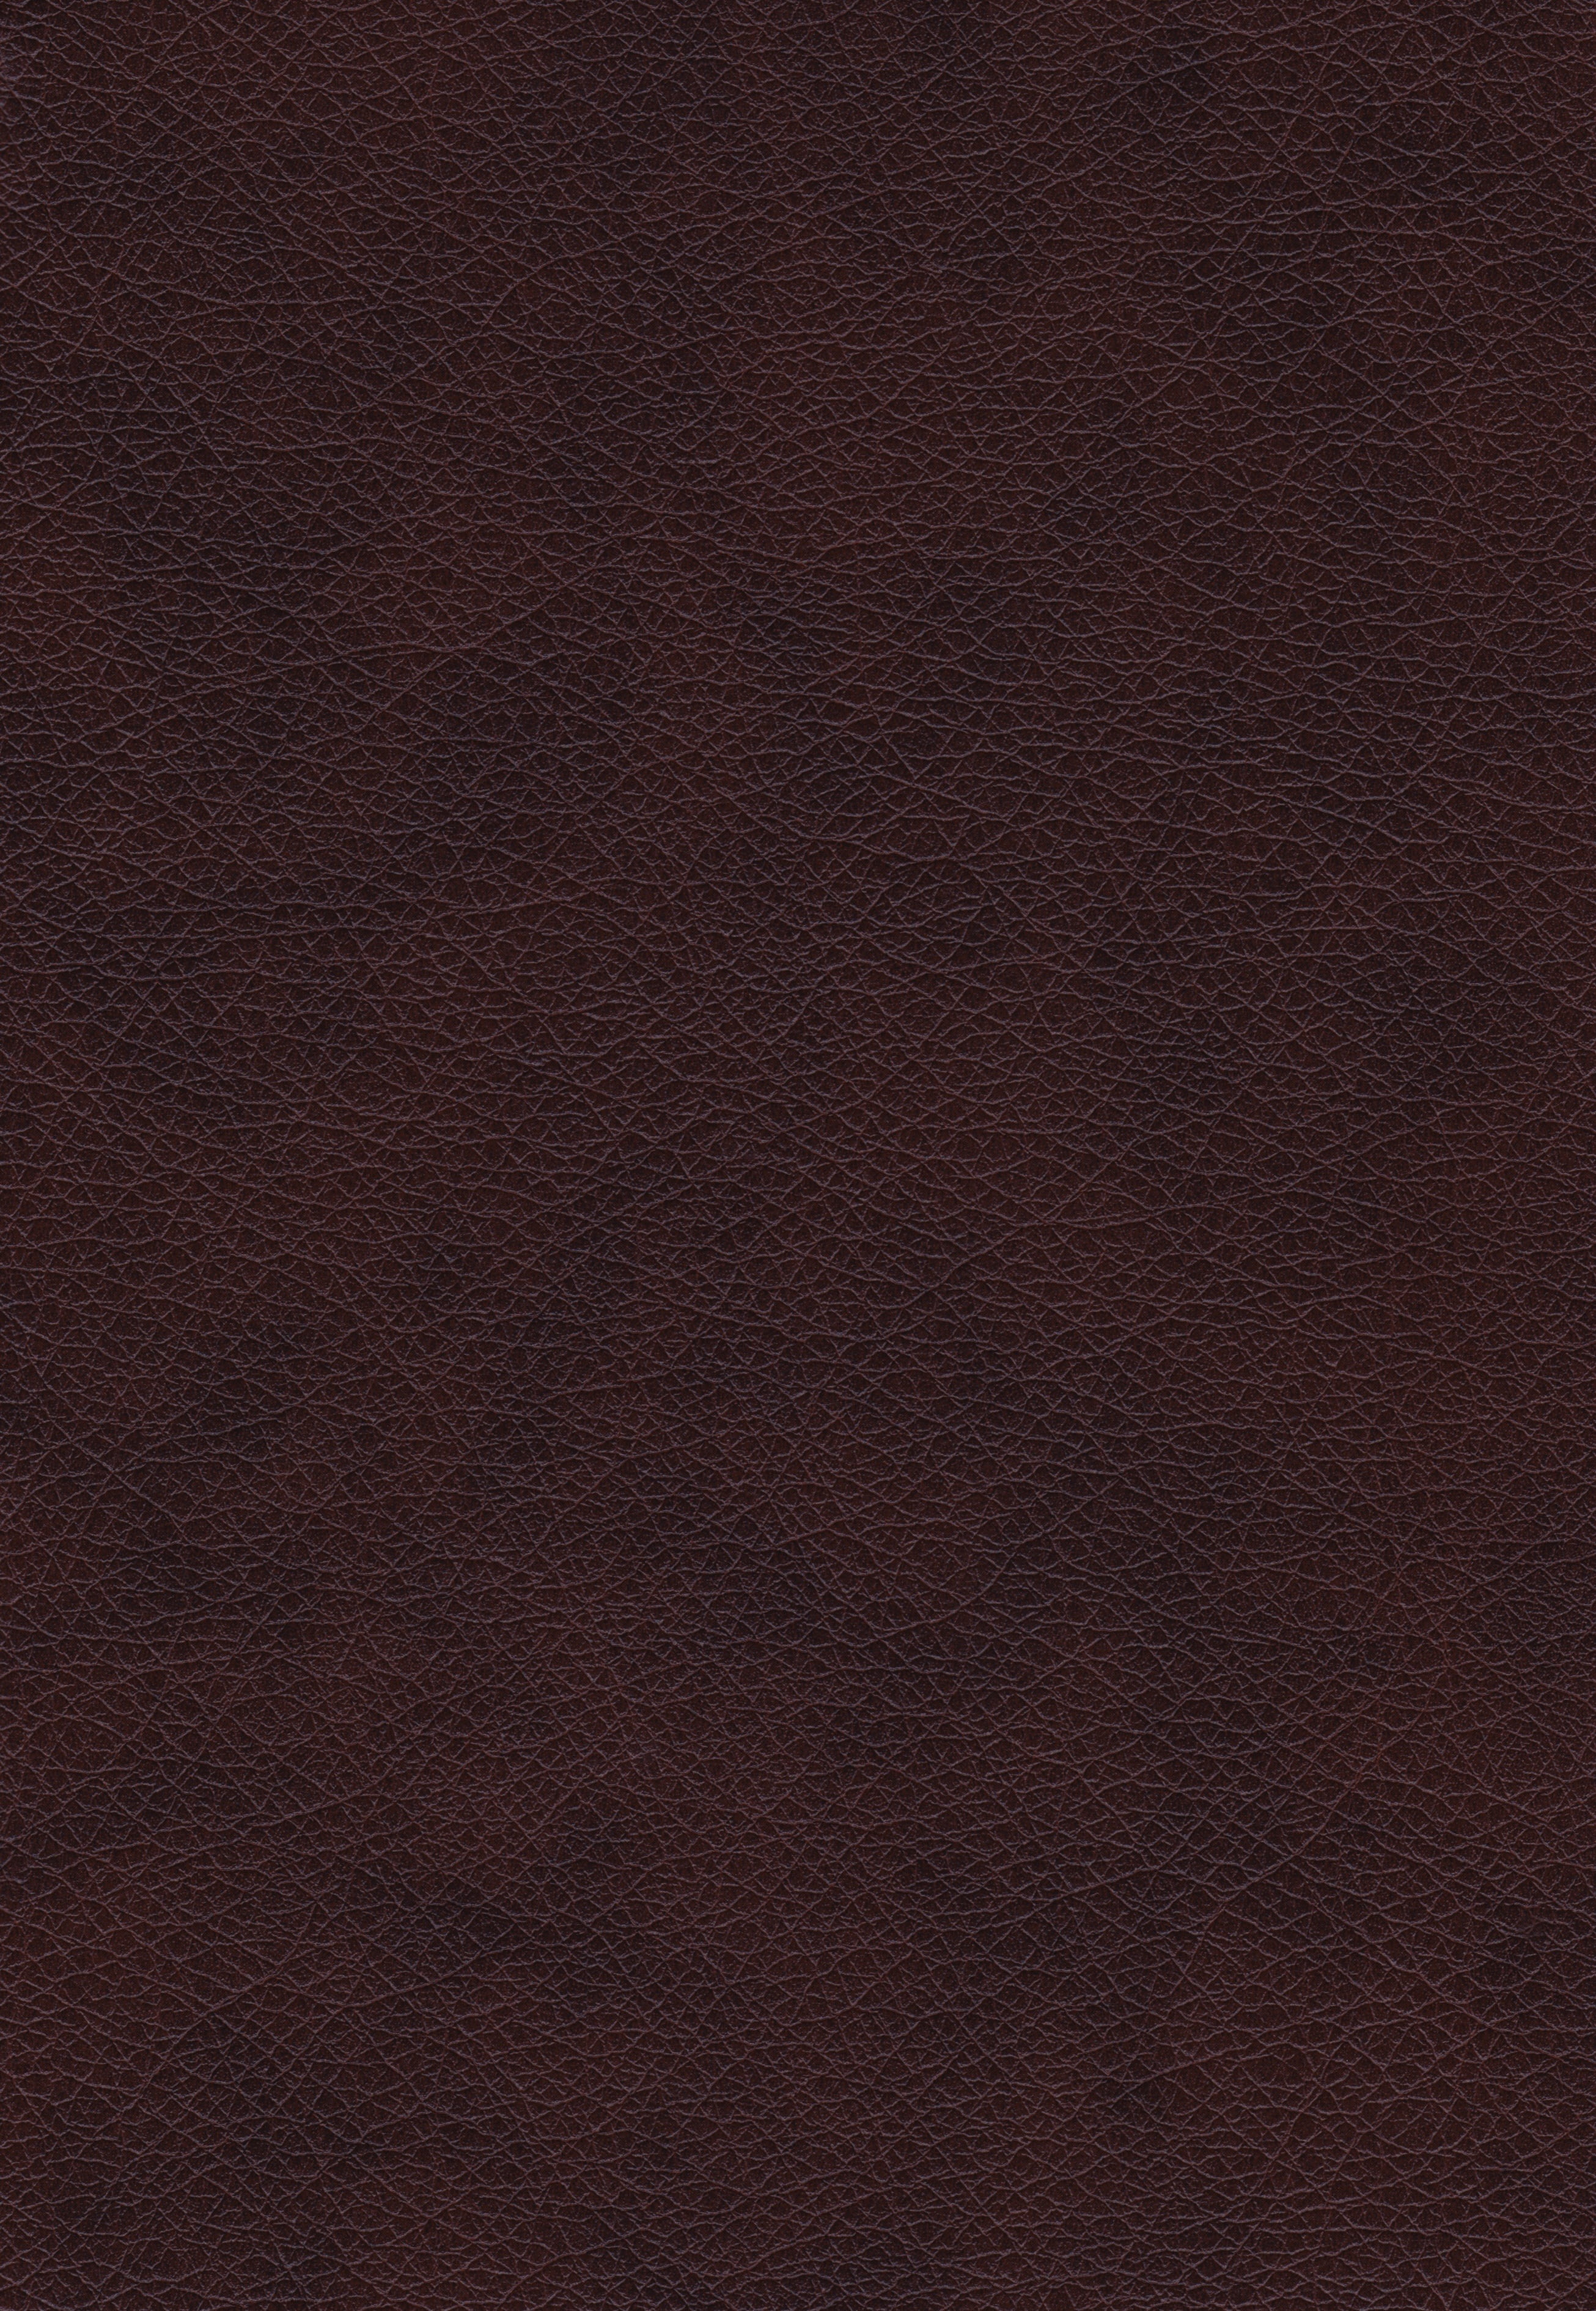 leather, textures, background, fabric, raw, decor, material, pattern